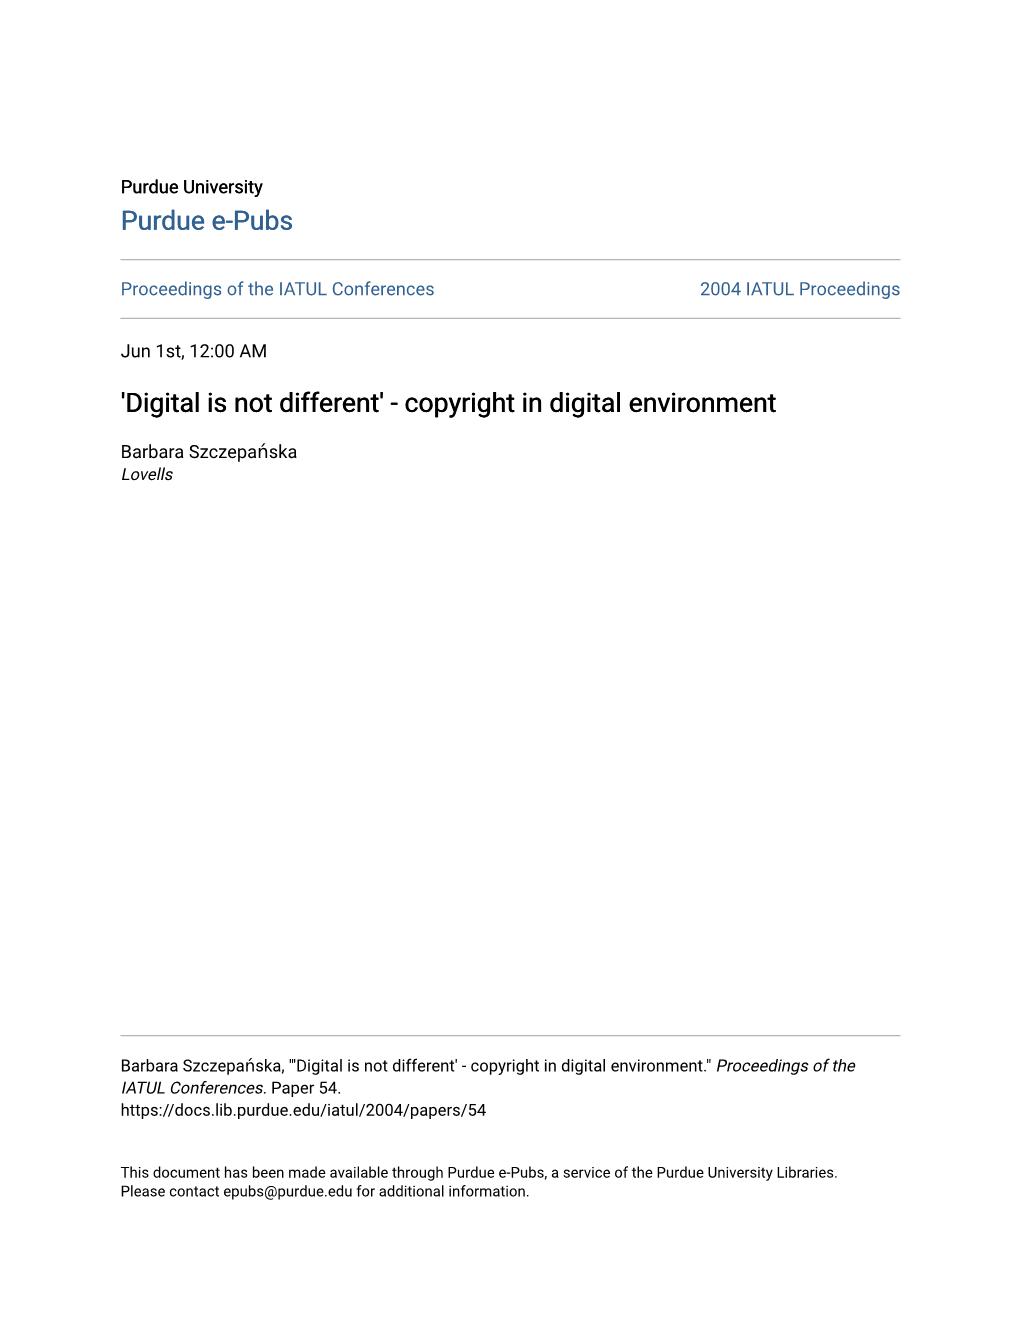 'Digital Is Not Different' - Copyright in Digital Environment